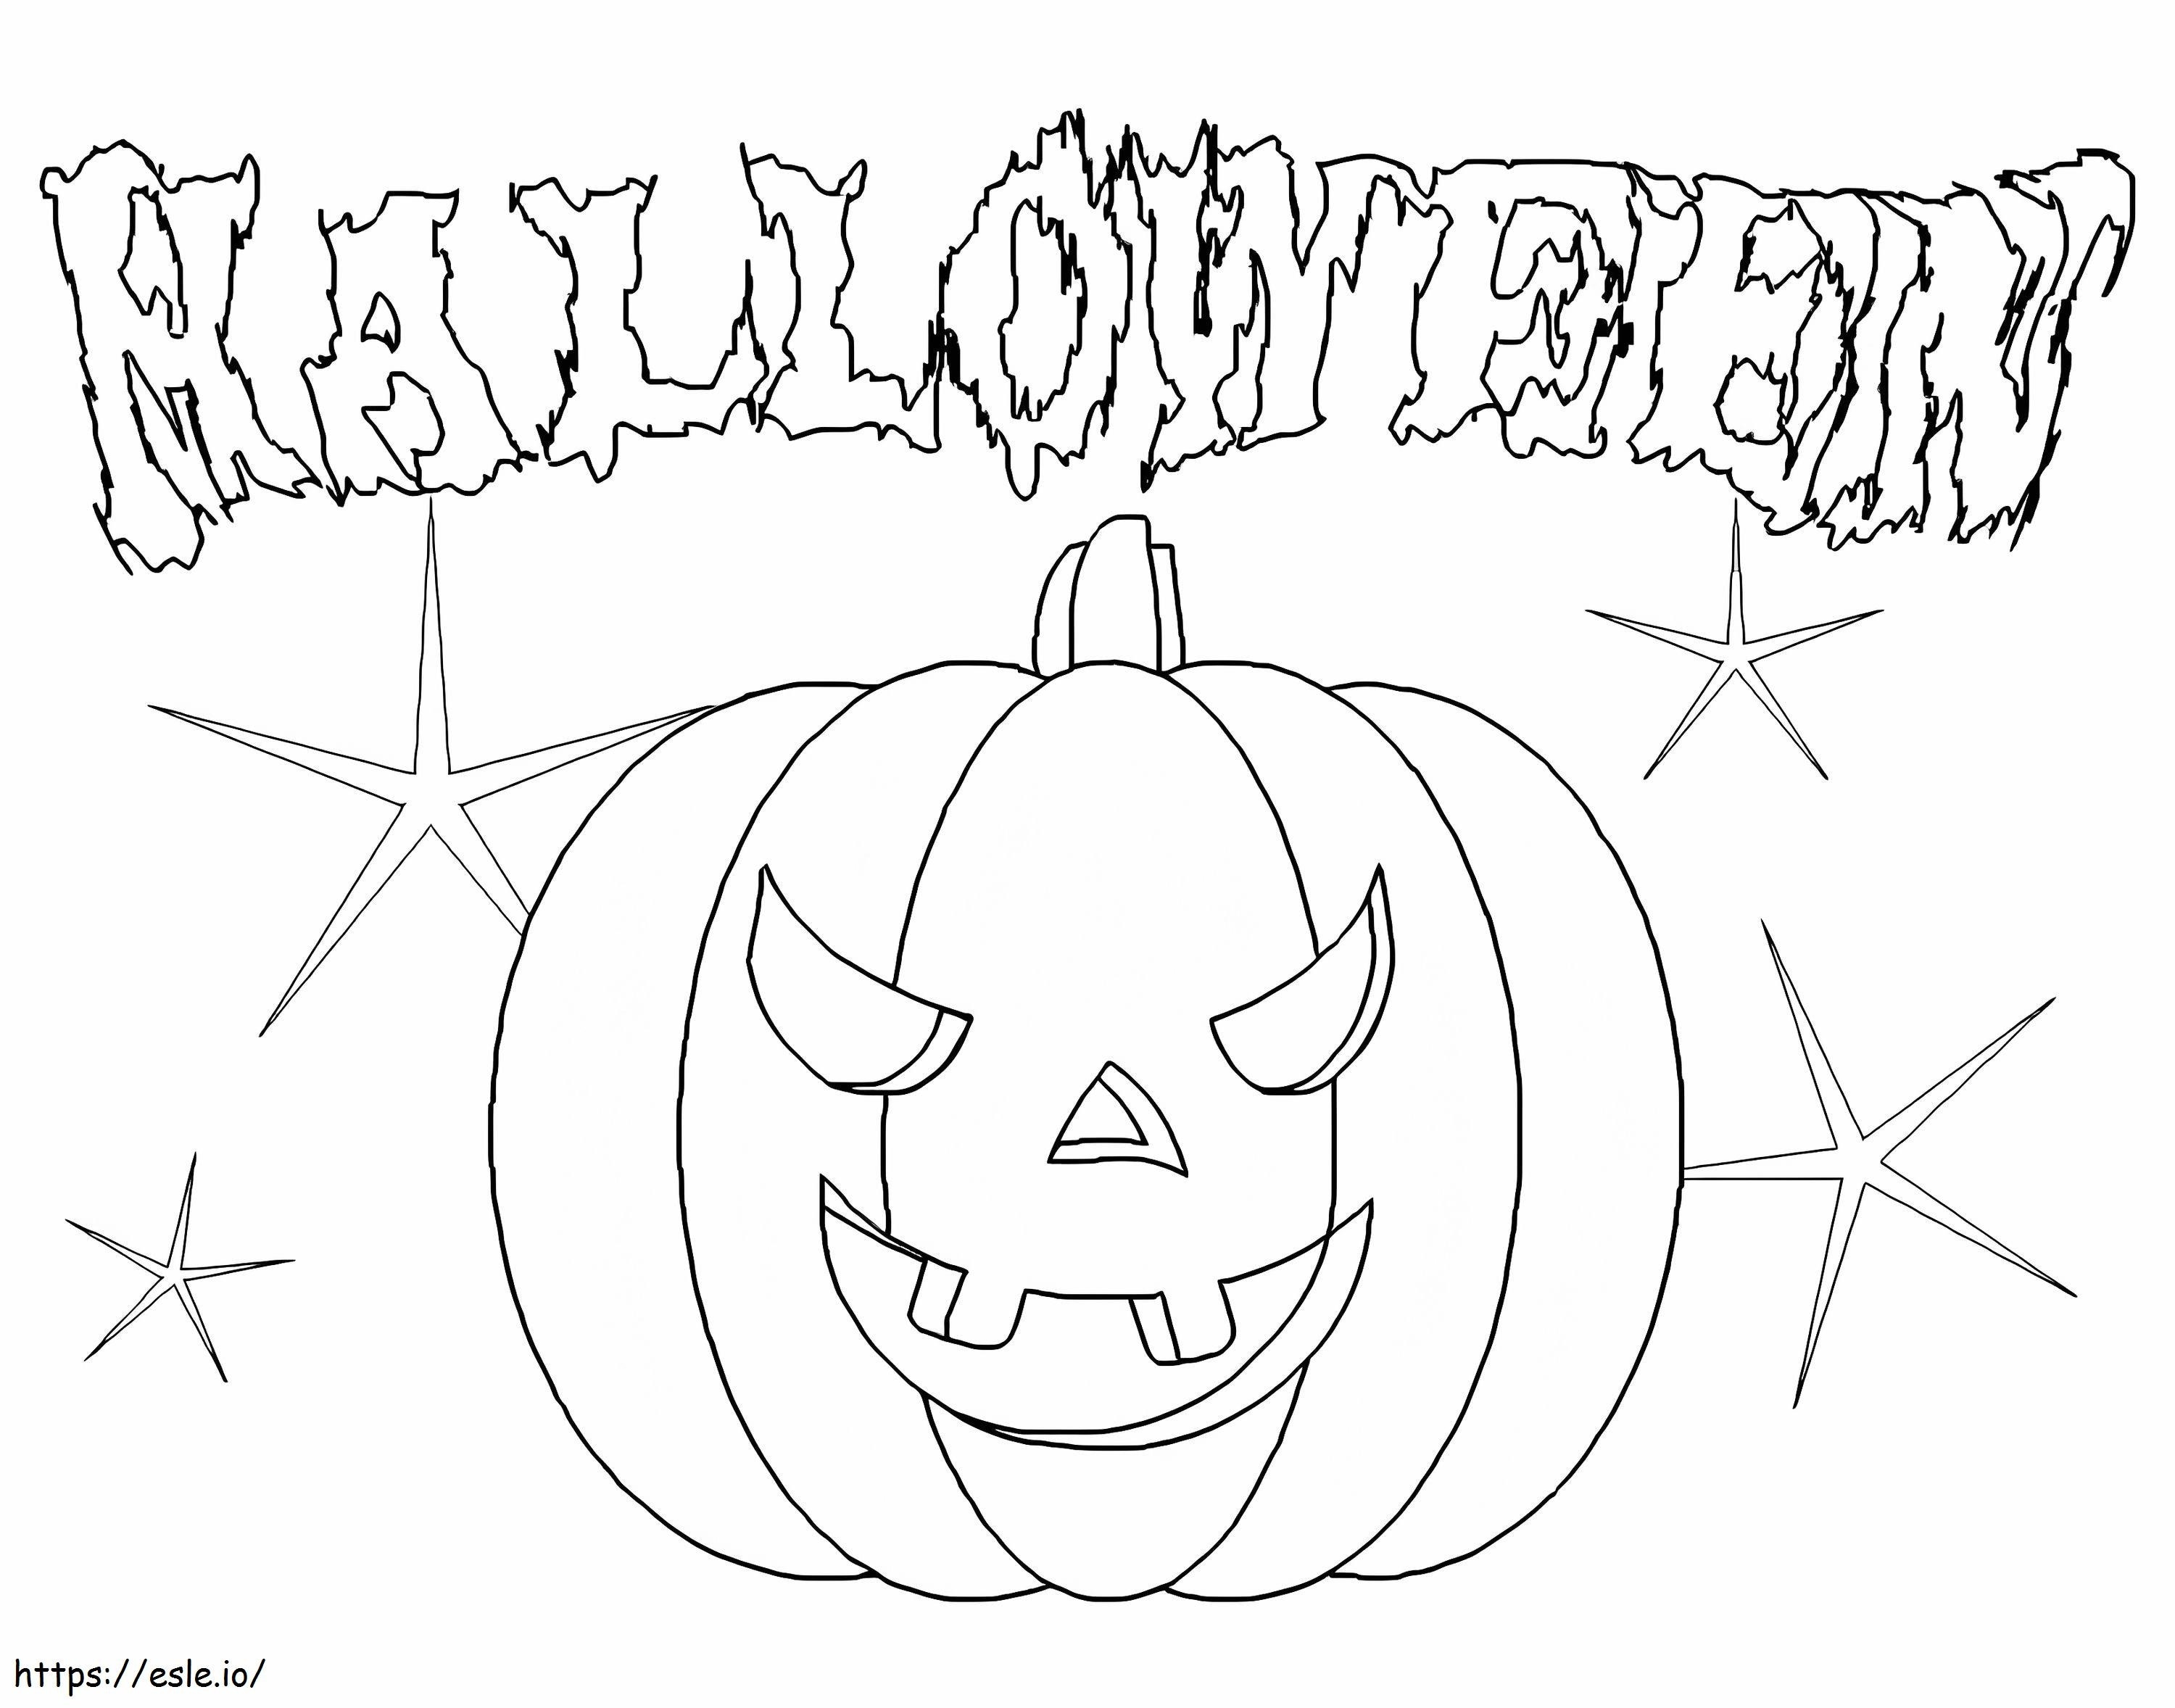 Scary Pumpkin coloring page